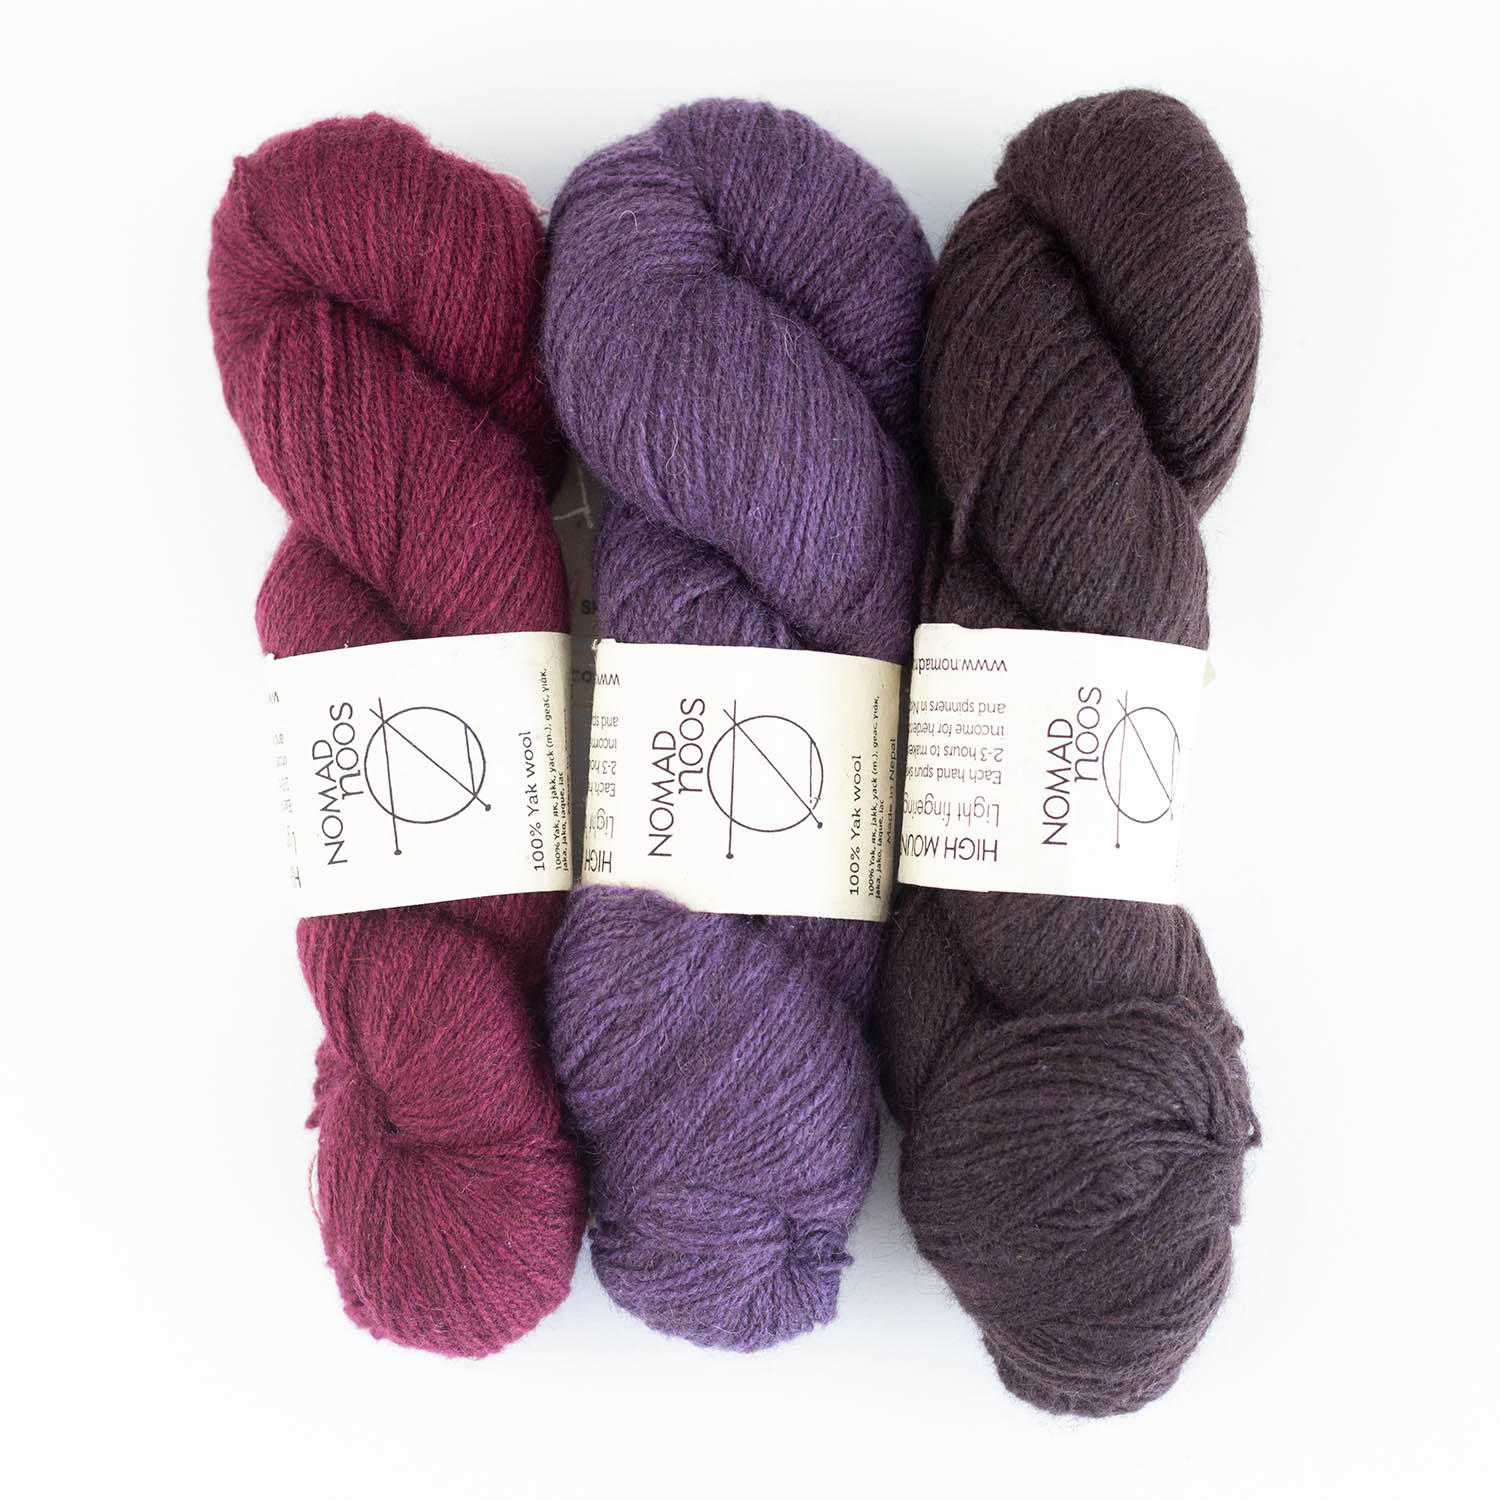 Yak yarn - A knitting guide to the luxuriously soft wool form Central Asia